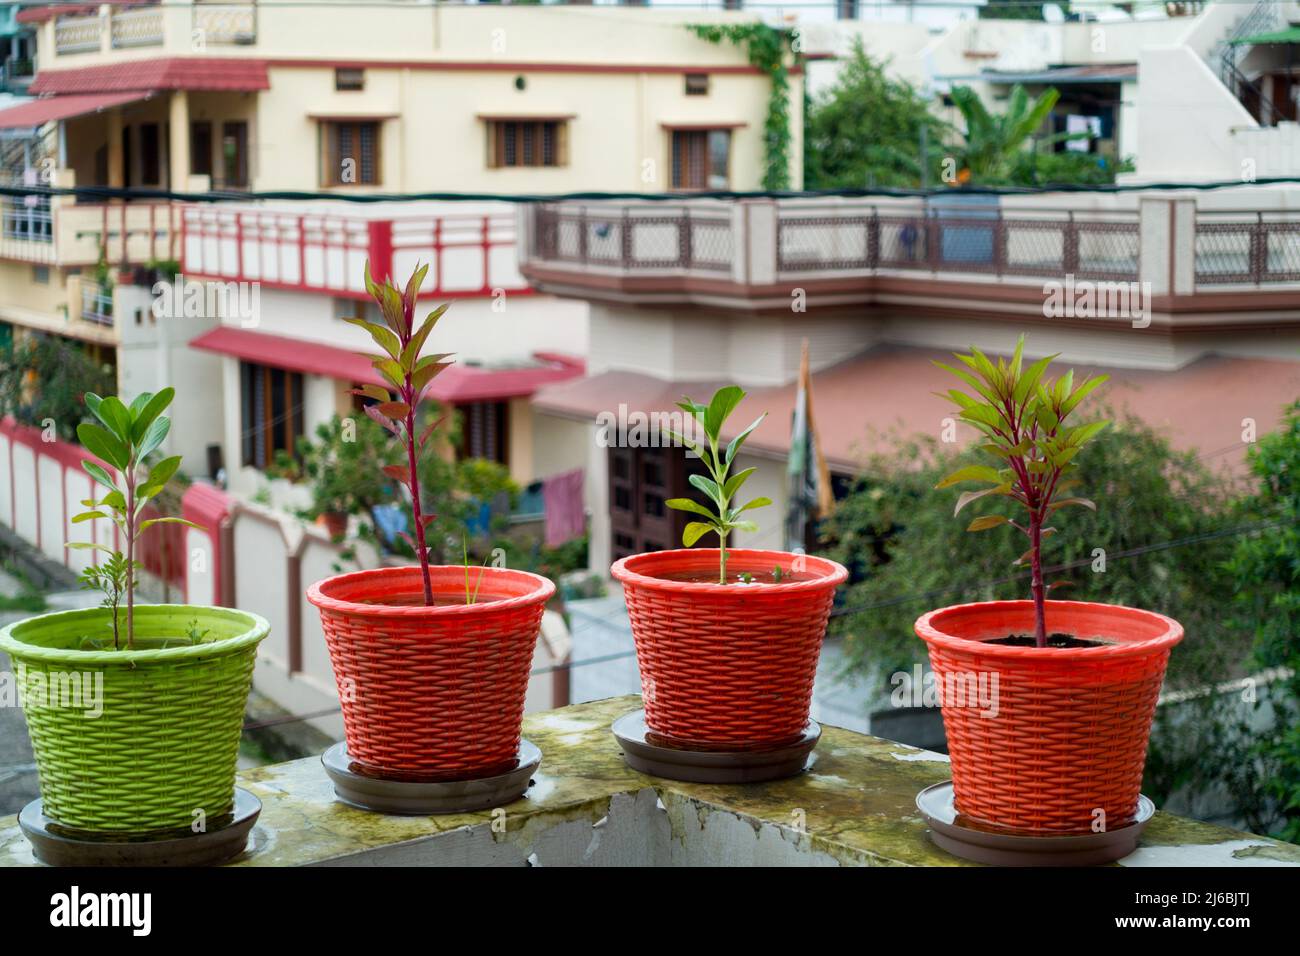 Colorful flower pots with plants placed on the wall of a terrace garden in an Indian household with out of focus background. Stock Photo